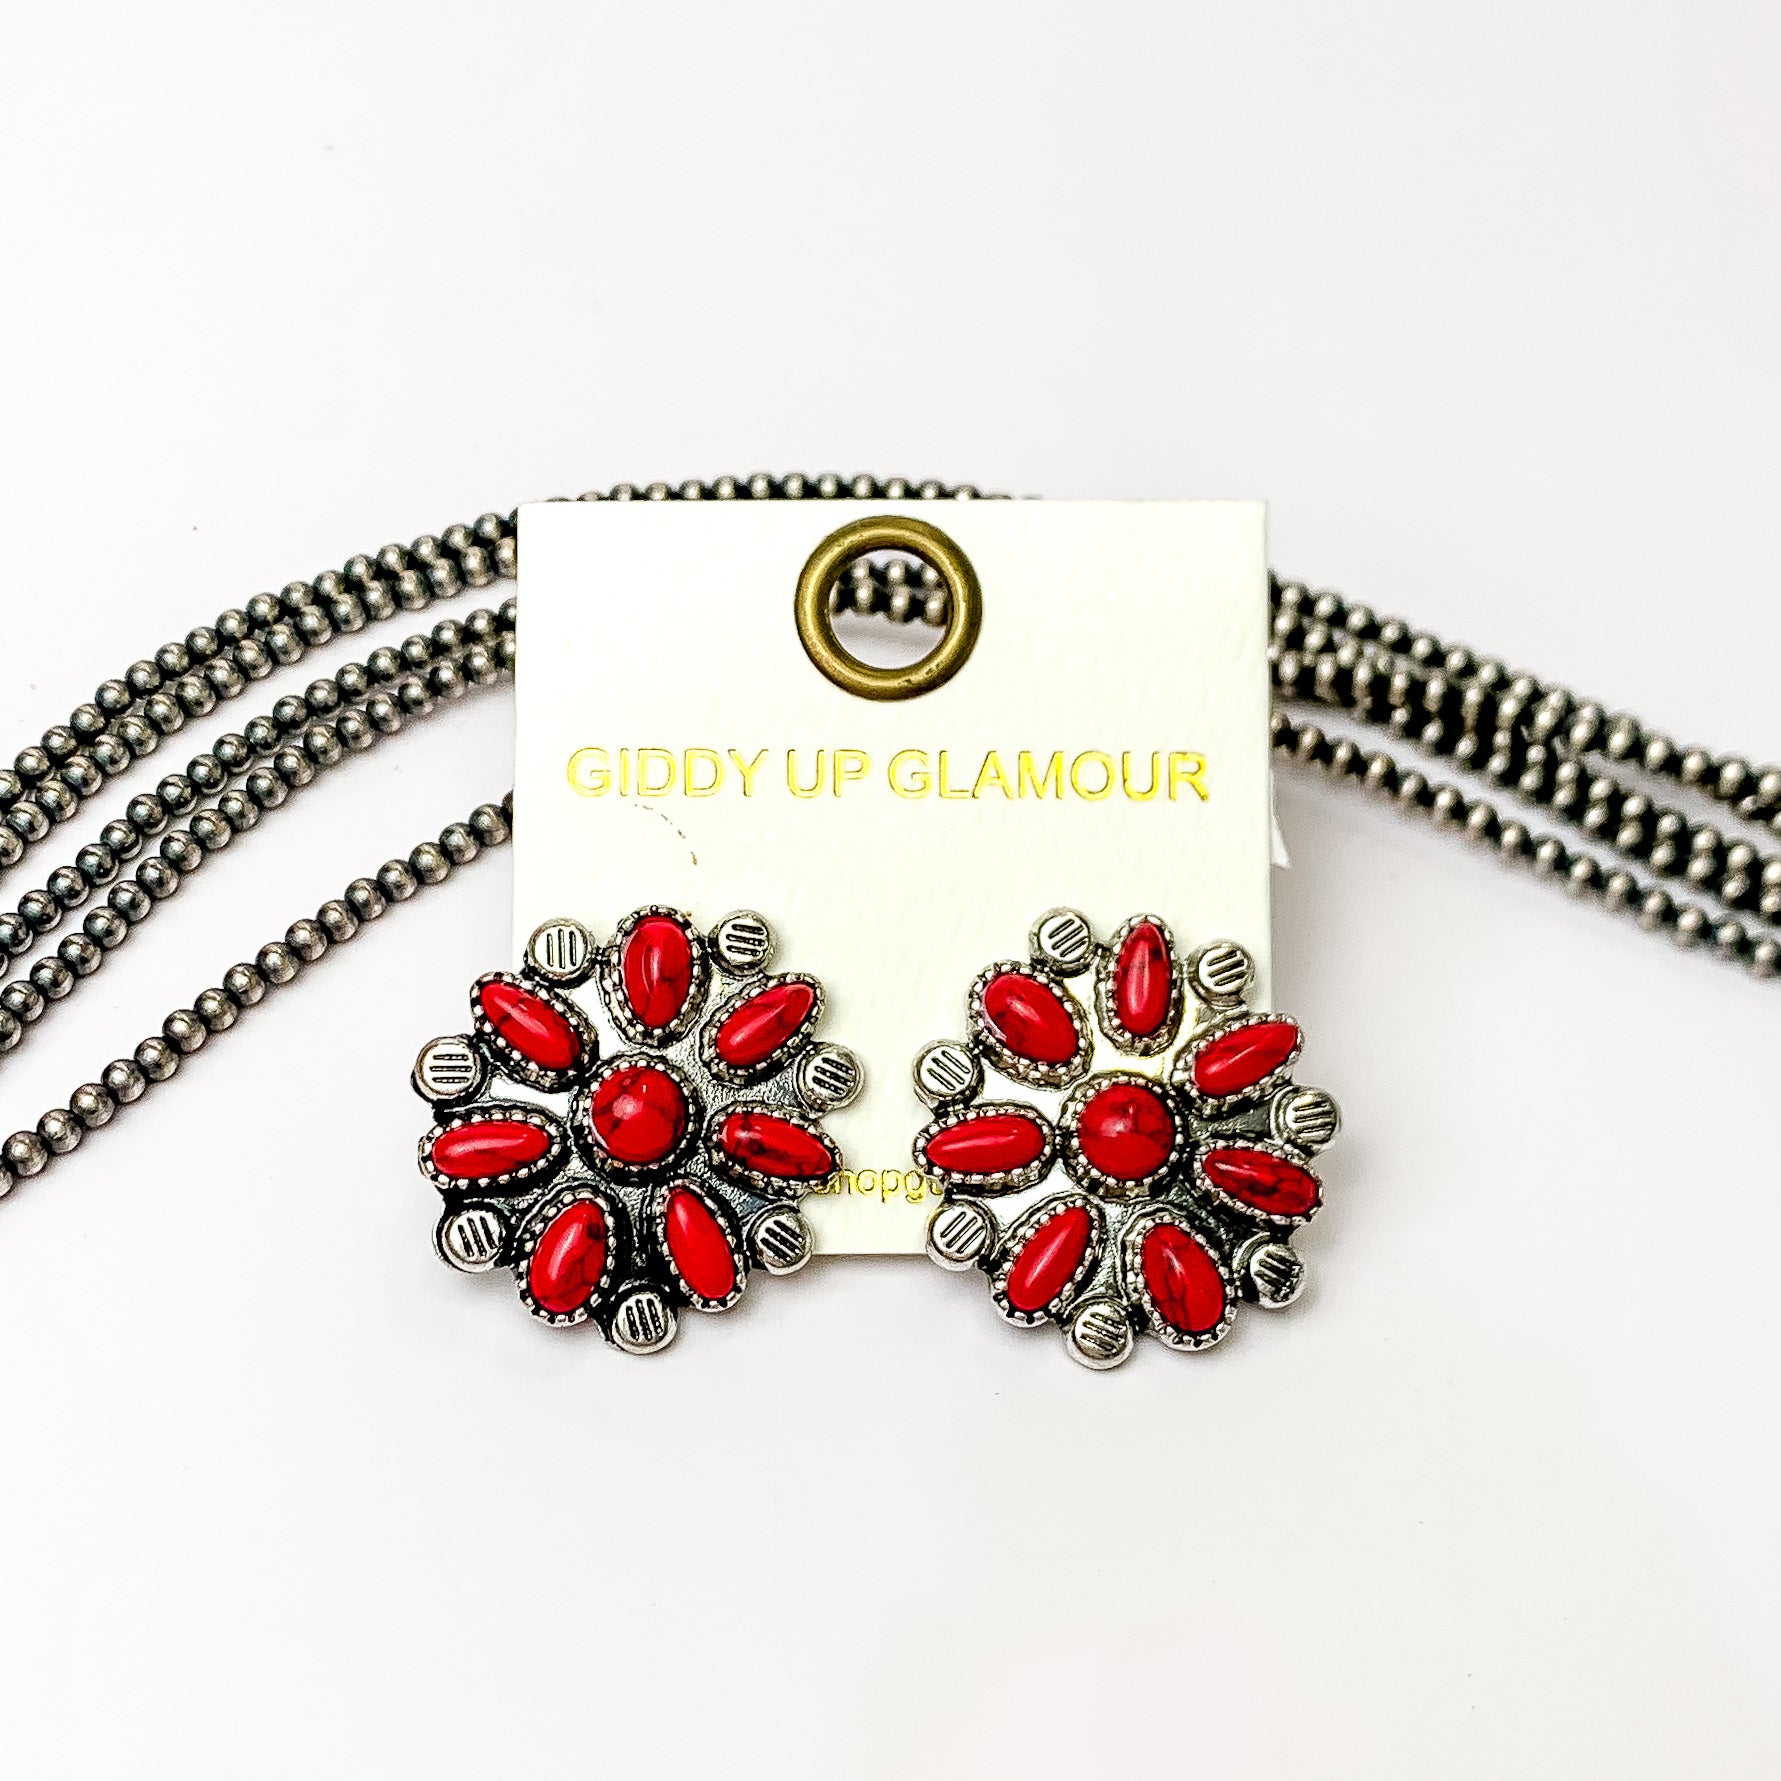 Faux Red Flower Cluster Stud Earrings in Silver Tone. Pictured on a white background with beads behind.